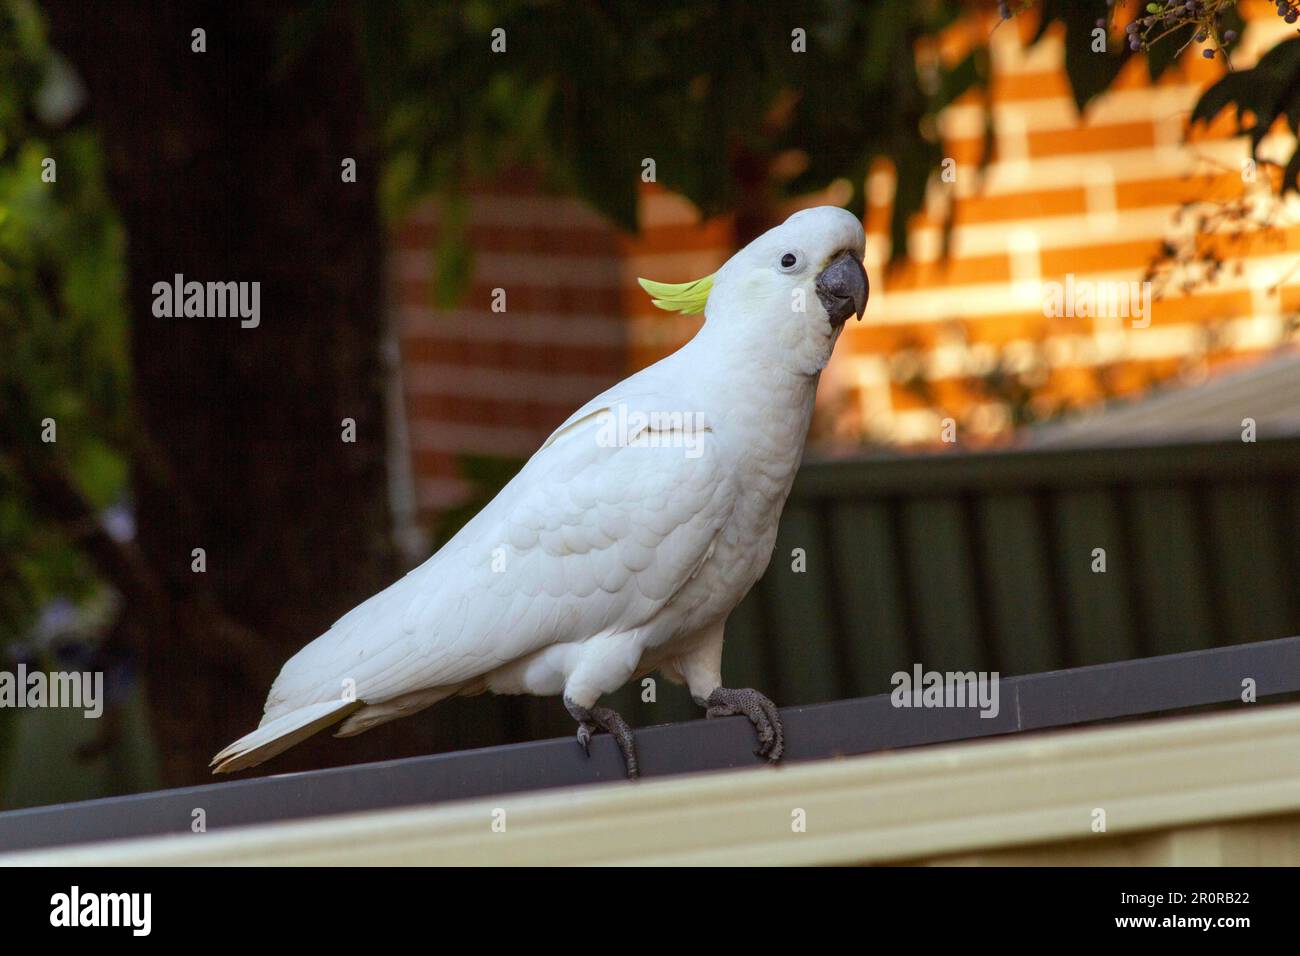 May 8, 2023, Sydney, New South Wales, Australia: Sulphur-Crested Cockatoos (Cacatua galerita) perching on a fence in Sydney, New South Wales, Australia. The Sulphur-Crested Cockatoo is a relatively large white cockatoo with a spectacular plumed yellow crest and dark bill. It is found in wooded habitats in Australia, New Guinea, and some of the islands of Indonesia. Sulphur Crested Cockatoos have multiple subspecies like Lesser, Medium, and Greater Sulphur Crested Cockatoo; all belong to the same Genus (Cacatua) and Phylum. Since all subspecies of Sulphur Crested cockatoos look very similar, th Stock Photo